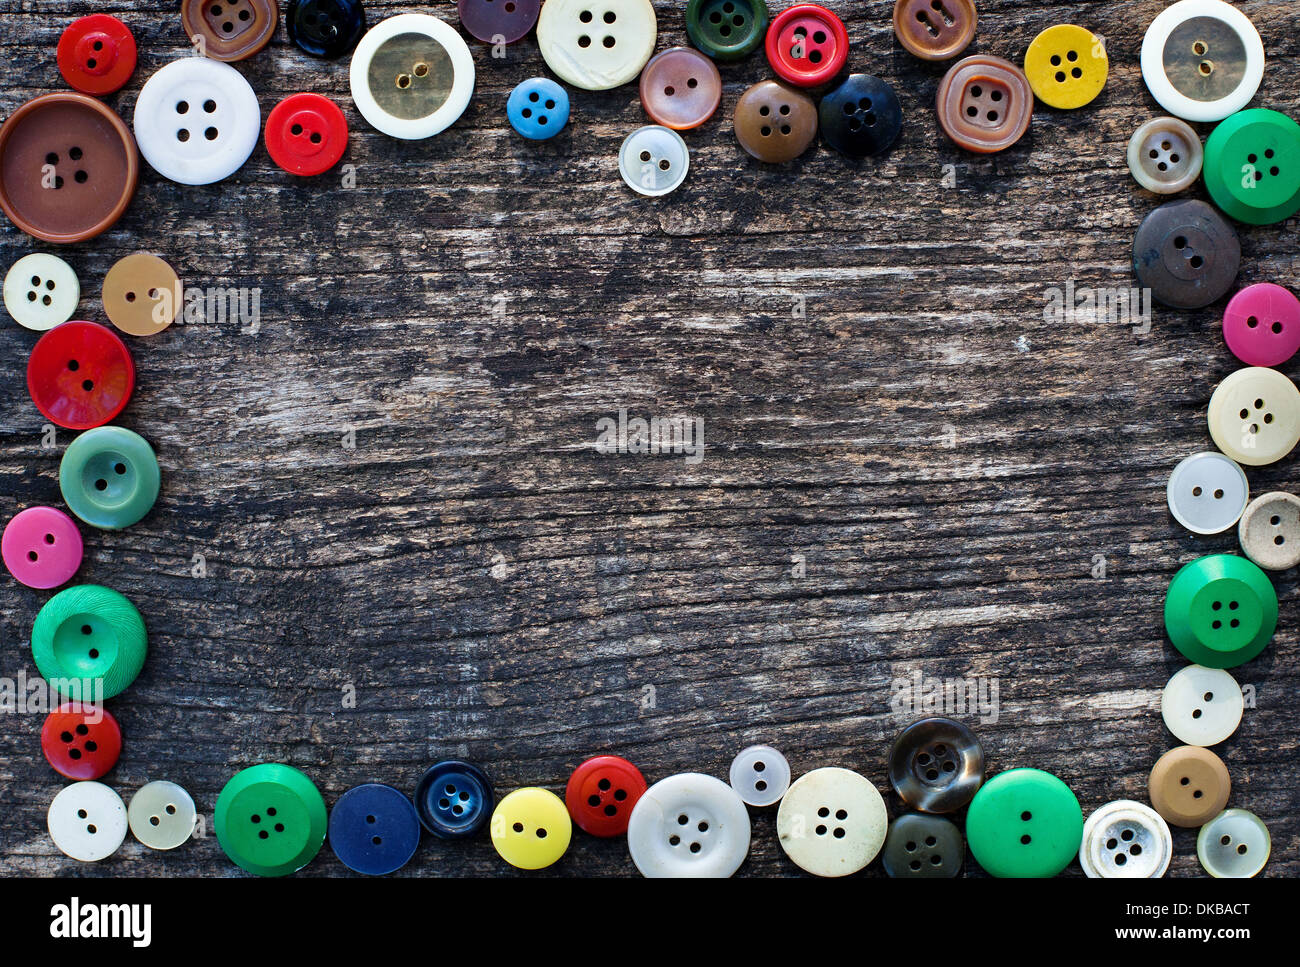 sewing background with frame from buttons Stock Photo